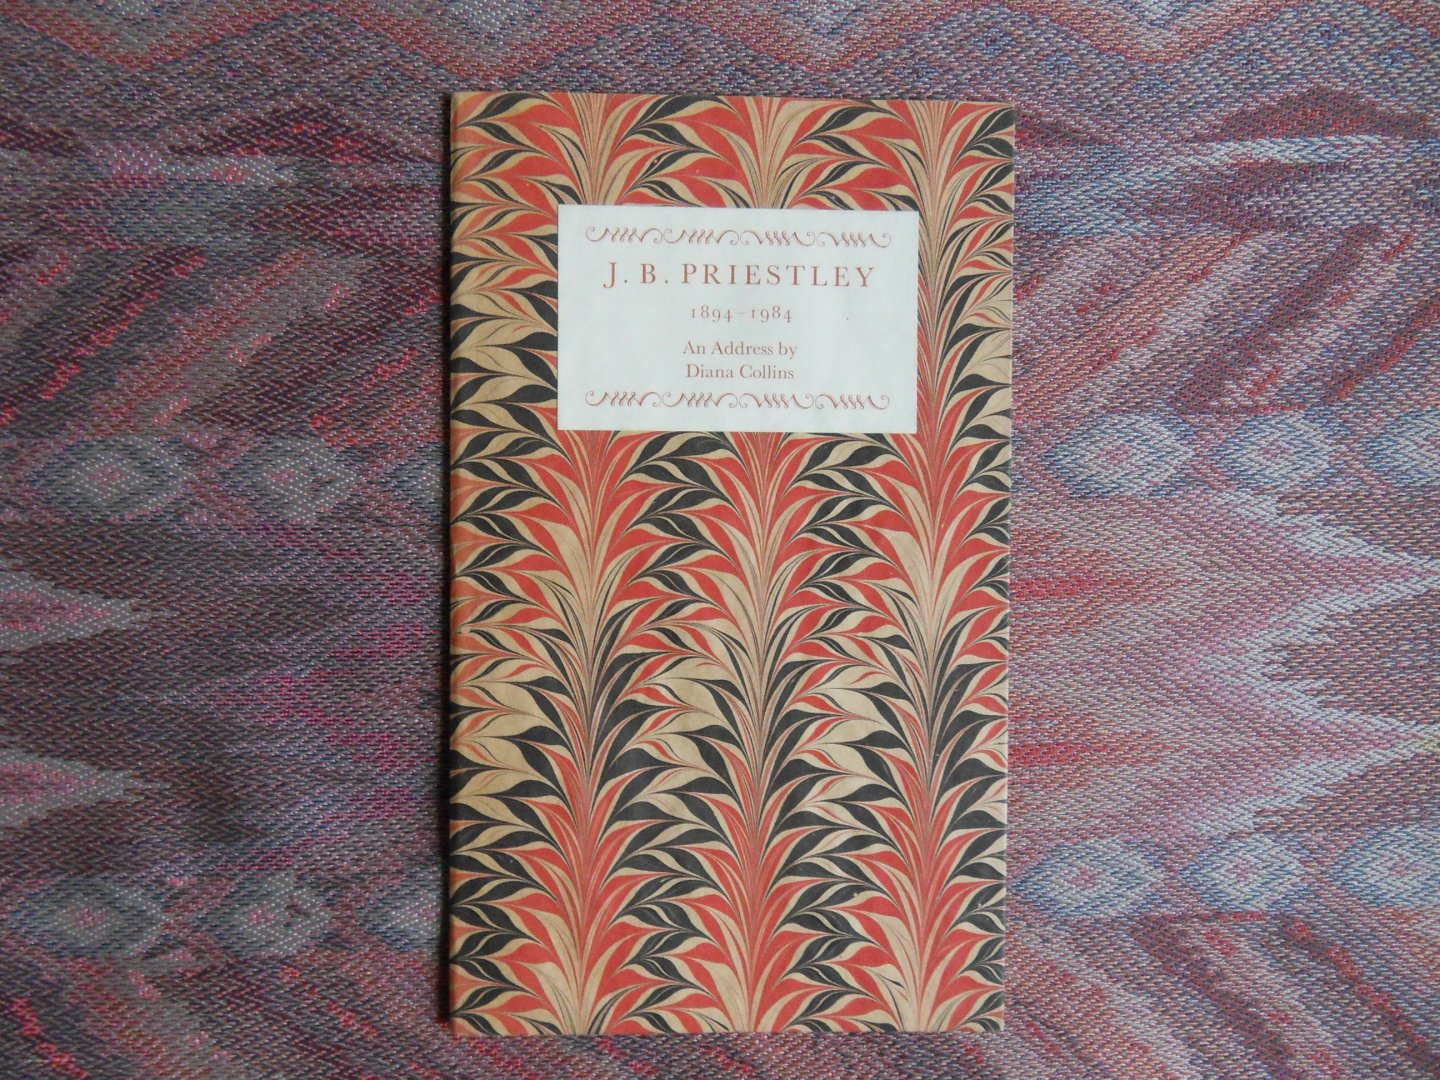 Collins, Diana. - J.B. Priestley. - 1894 - 1984. - An Address given by Diana Collins at a Service of Thanksgiving in Westminster Abbey on 2 October 1984.